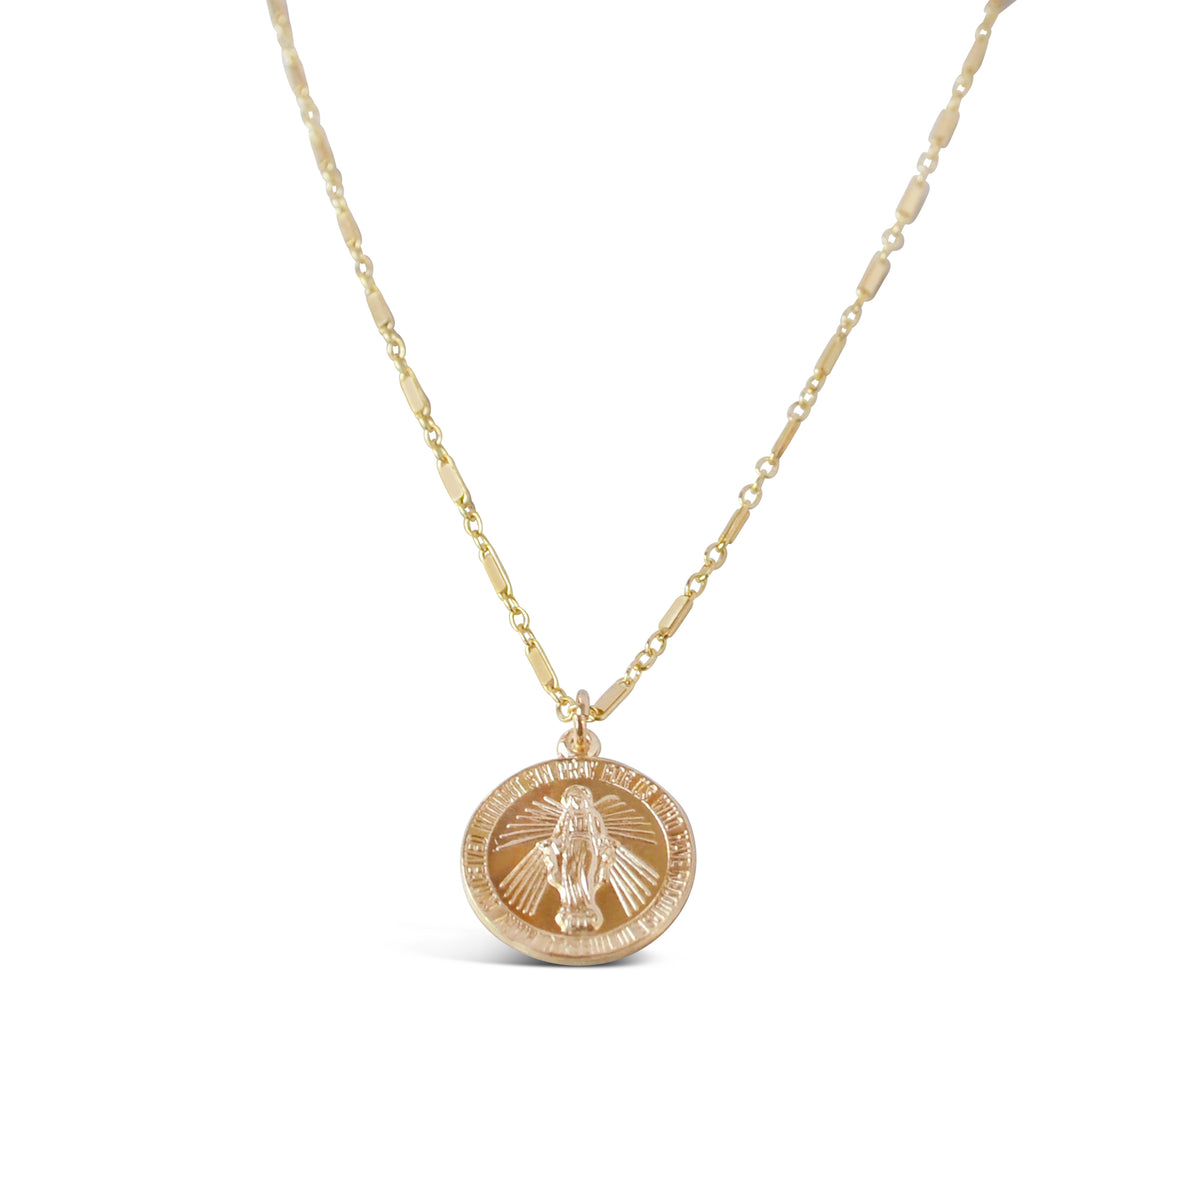 Mother Mary Coin Necklace, Gold or Silver